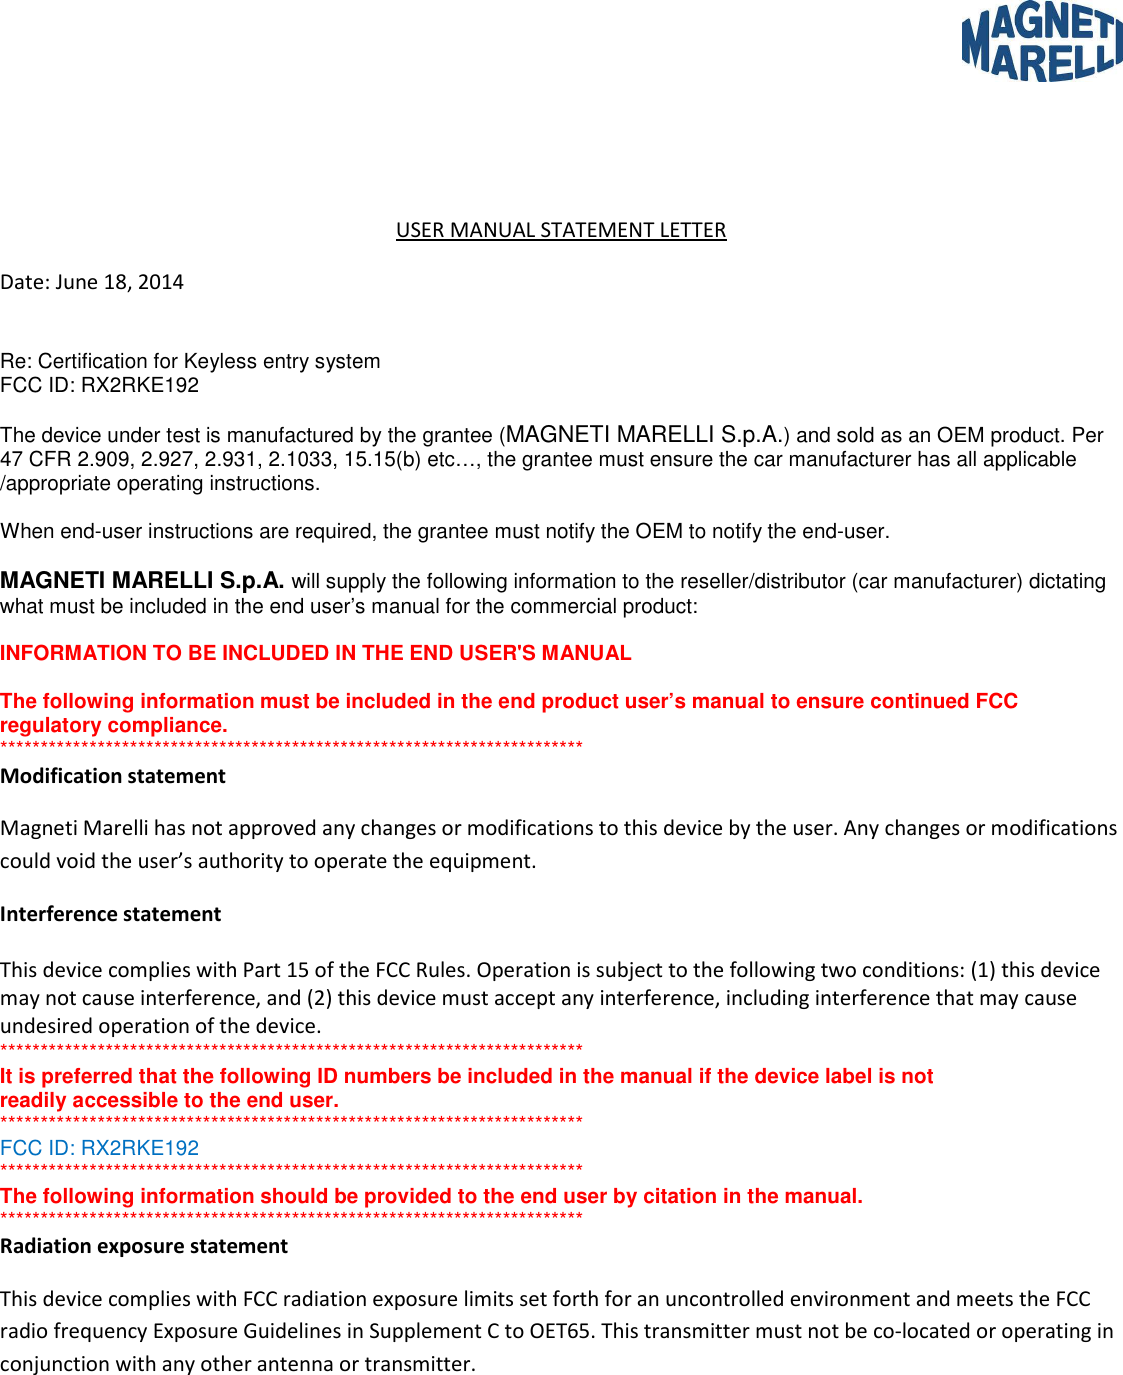     USER MANUAL STATEMENT LETTER Date: June 18, 2014  Re: Certification for Keyless entry system FCC ID: RX2RKE192  The device under test is manufactured by the grantee (MAGNETI MARELLI S.p.A.) and sold as an OEM product. Per 47 CFR 2.909, 2.927, 2.931, 2.1033, 15.15(b) etc…, the grantee must ensure the car manufacturer has all applicable /appropriate operating instructions.  When end-user instructions are required, the grantee must notify the OEM to notify the end-user.  MAGNETI MARELLI S.p.A. will supply the following information to the reseller/distributor (car manufacturer) dictating what must be included in the end user’s manual for the commercial product:  INFORMATION TO BE INCLUDED IN THE END USER&apos;S MANUAL  The following information must be included in the end product user’s manual to ensure continued FCC regulatory compliance. ************************************************************************ Modification statement  Magneti Marelli has not approved any changes or modifications to this device by the user. Any changes or modifications could void the user’s authority to operate the equipment. Interference statement   This device complies with Part 15 of the FCC Rules. Operation is subject to the following two conditions: (1) this device may not cause interference, and (2) this device must accept any interference, including interference that may cause undesired operation of the device. ************************************************************************ It is preferred that the following ID numbers be included in the manual if the device label is not readily accessible to the end user. ************************************************************************ FCC ID: RX2RKE192 ************************************************************************ The following information should be provided to the end user by citation in the manual.  ************************************************************************ Radiation exposure statement  This device complies with FCC radiation exposure limits set forth for an uncontrolled environment and meets the FCC radio frequency Exposure Guidelines in Supplement C to OET65. This transmitter must not be co-located or operating in conjunction with any other antenna or transmitter.   